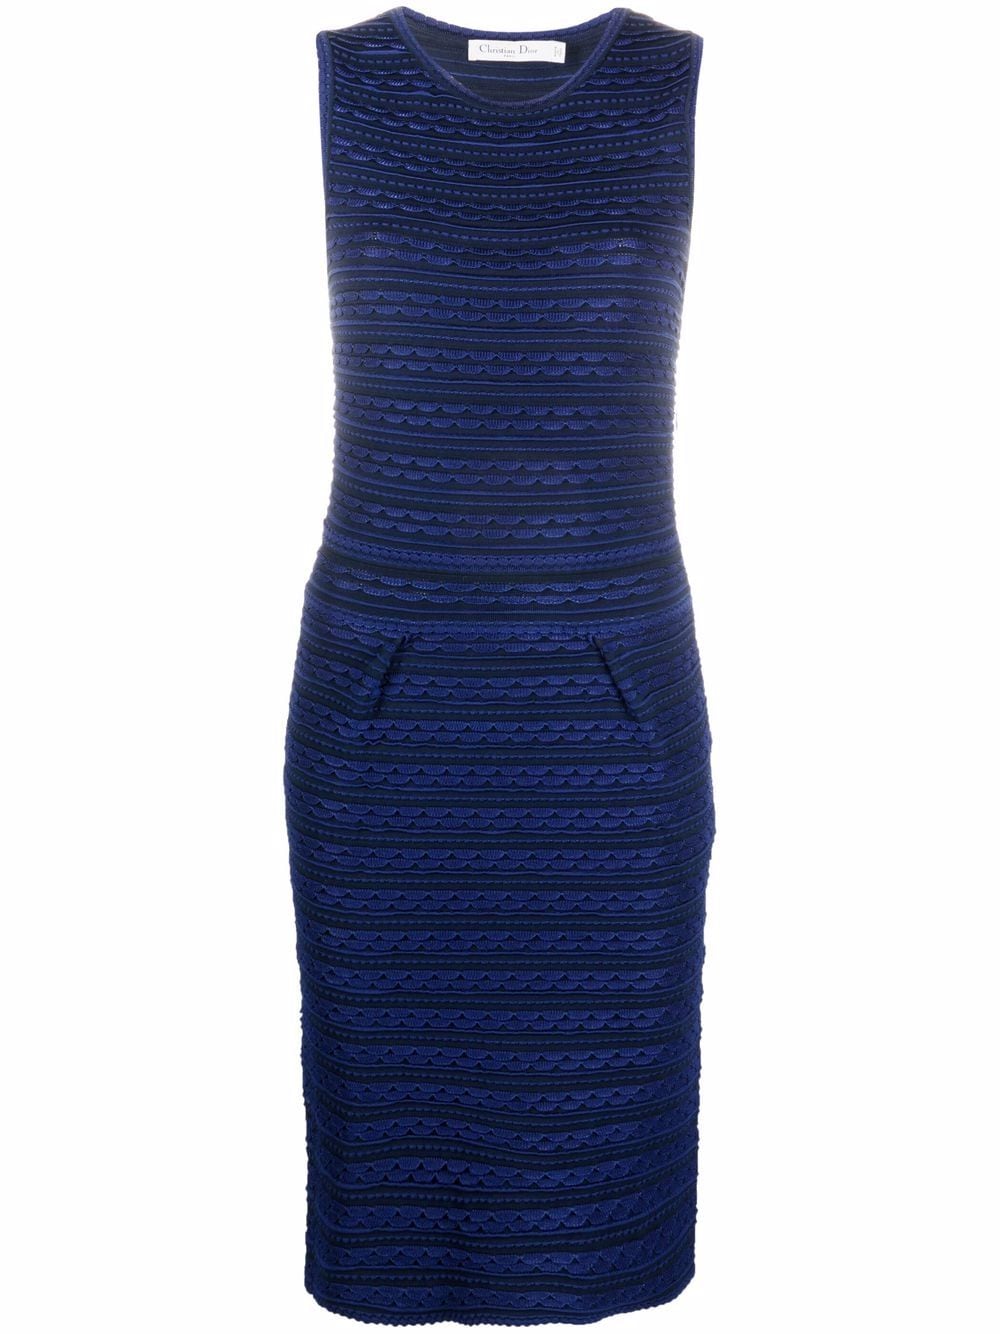 Christian Dior 2010s pre-owned scalloped effect knitted dress - Blue von Christian Dior